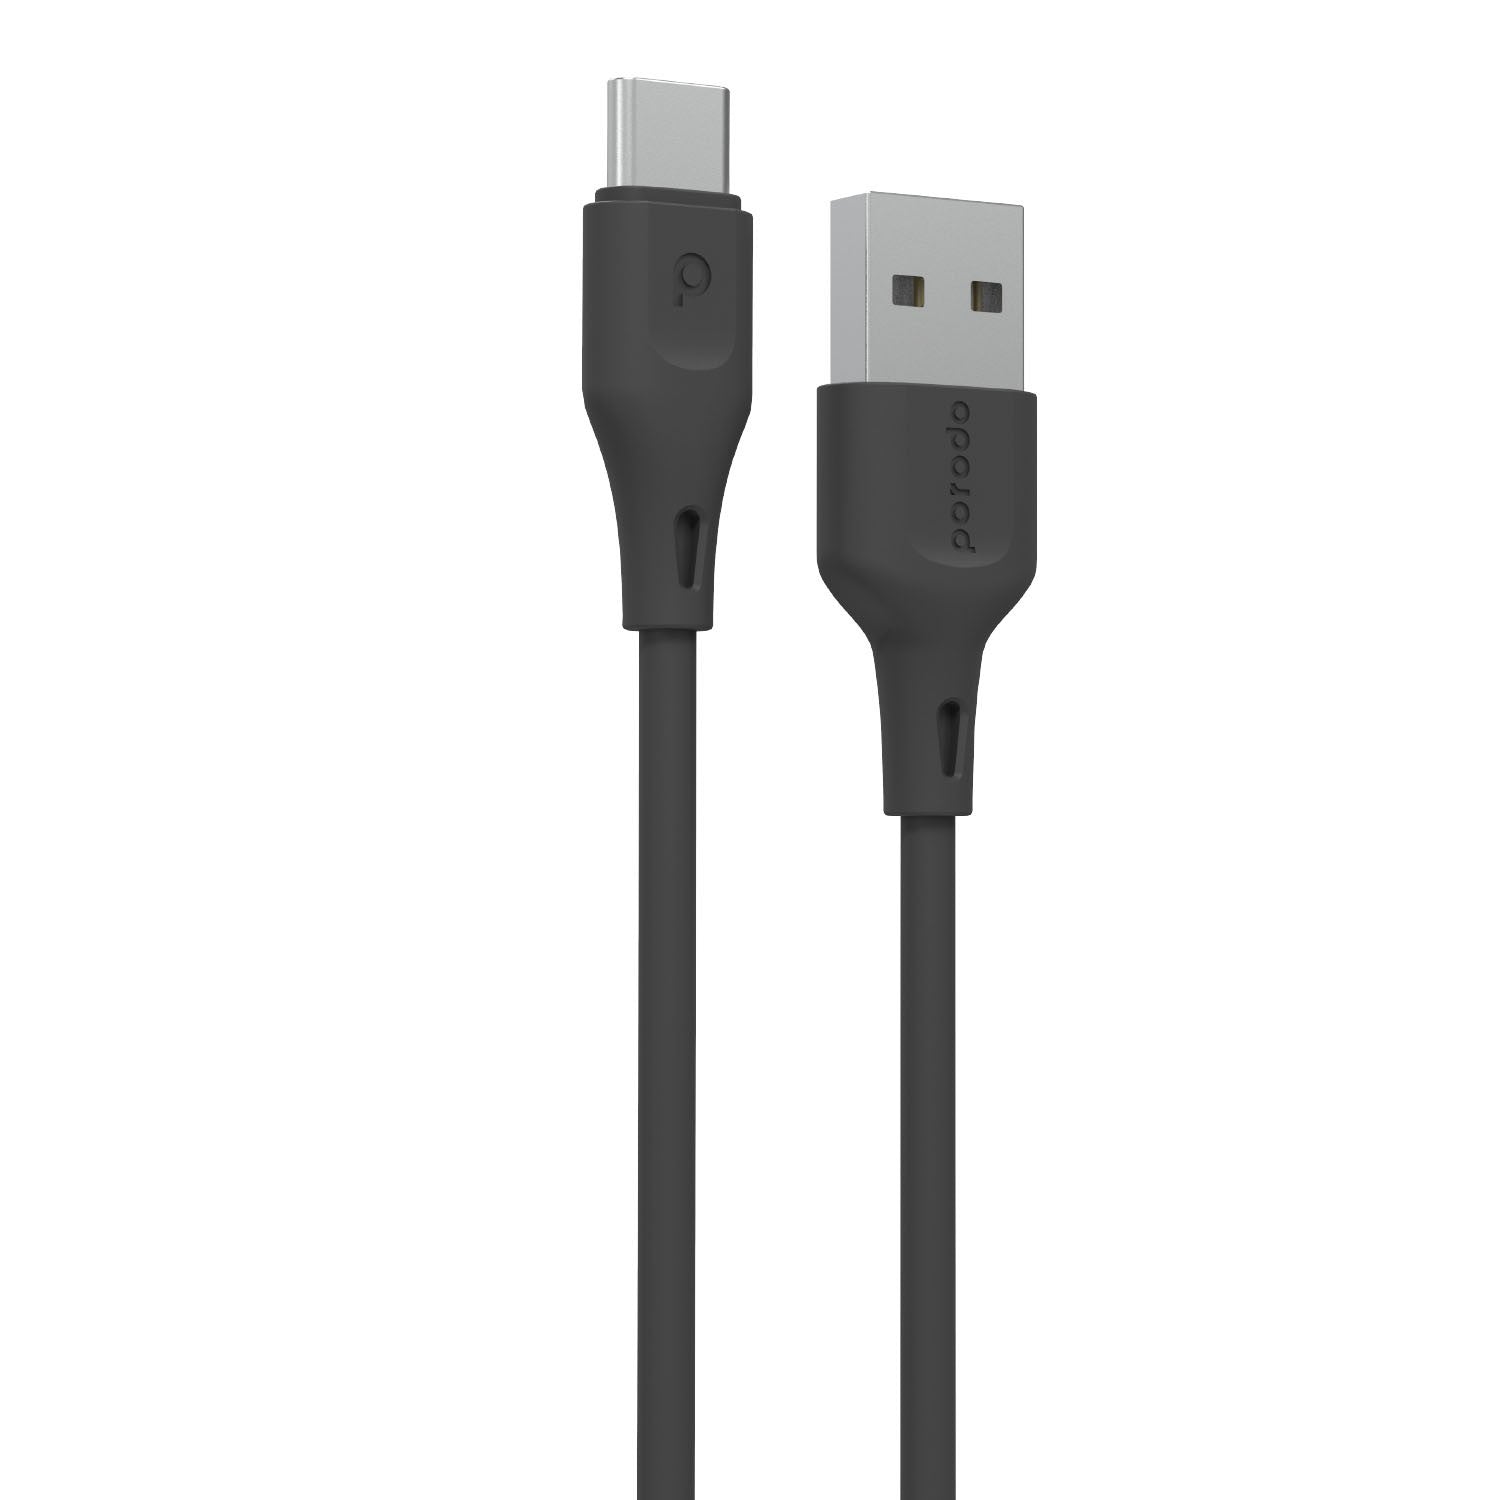 Porodo USB Cable Type-C Connector 3A Durable Fast Charge and Data Cable (1.2m/4ft) - Black - DXOU